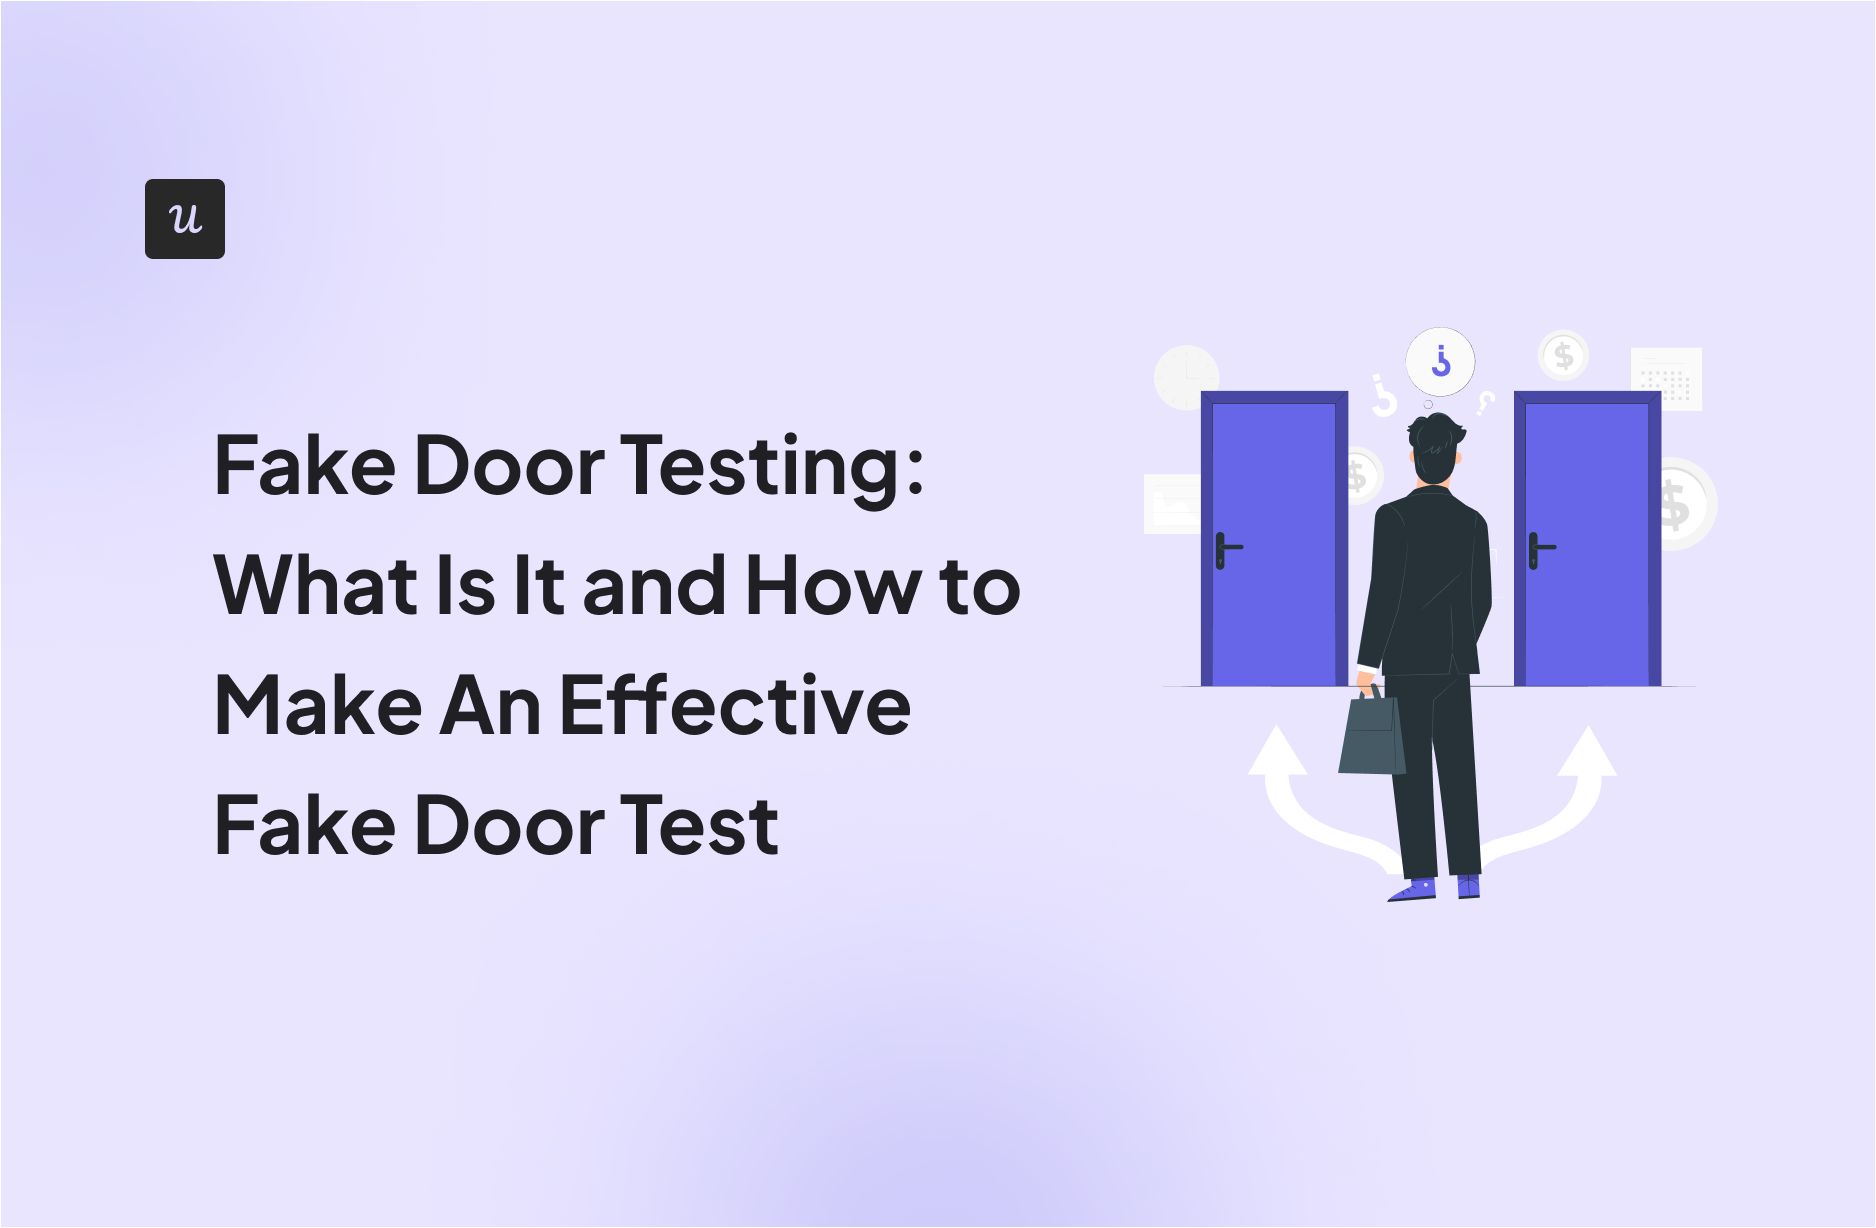 Fake Door Testing: What Is It and How to Make An Effective Fake Door Test